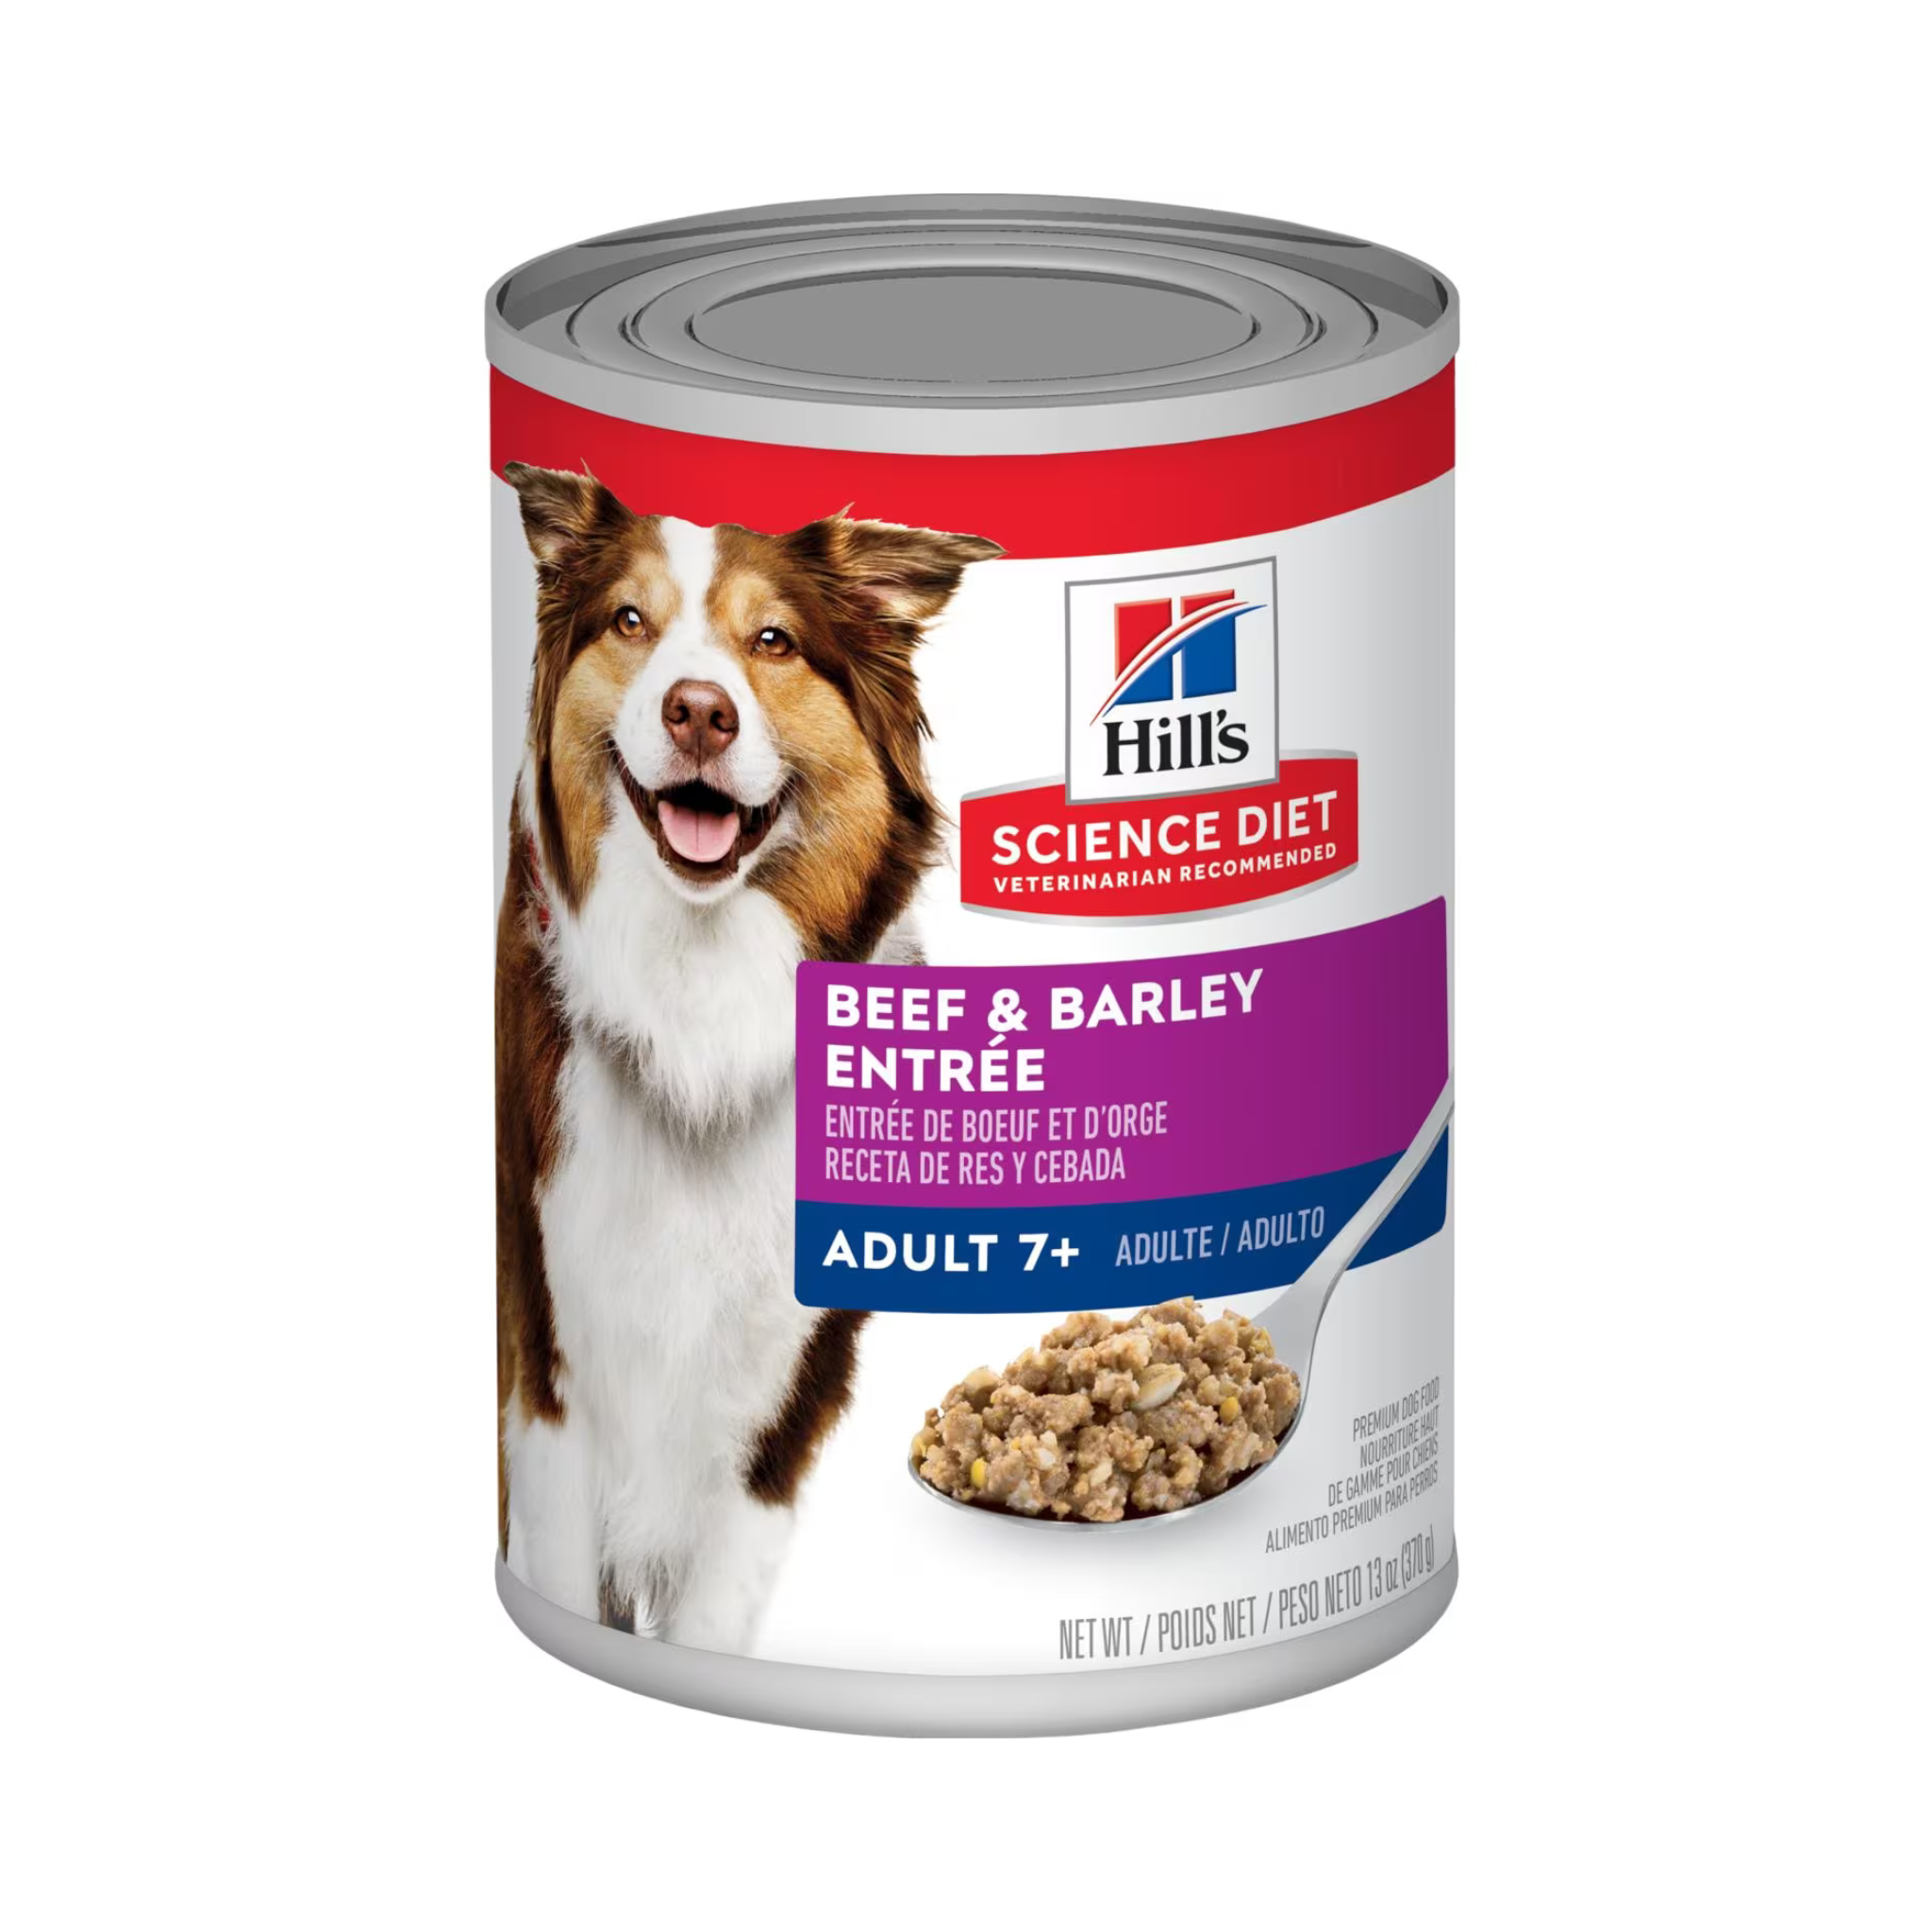 Hill's Science Diet Beef & Barley Entrée Adult 7+ Dog Canned